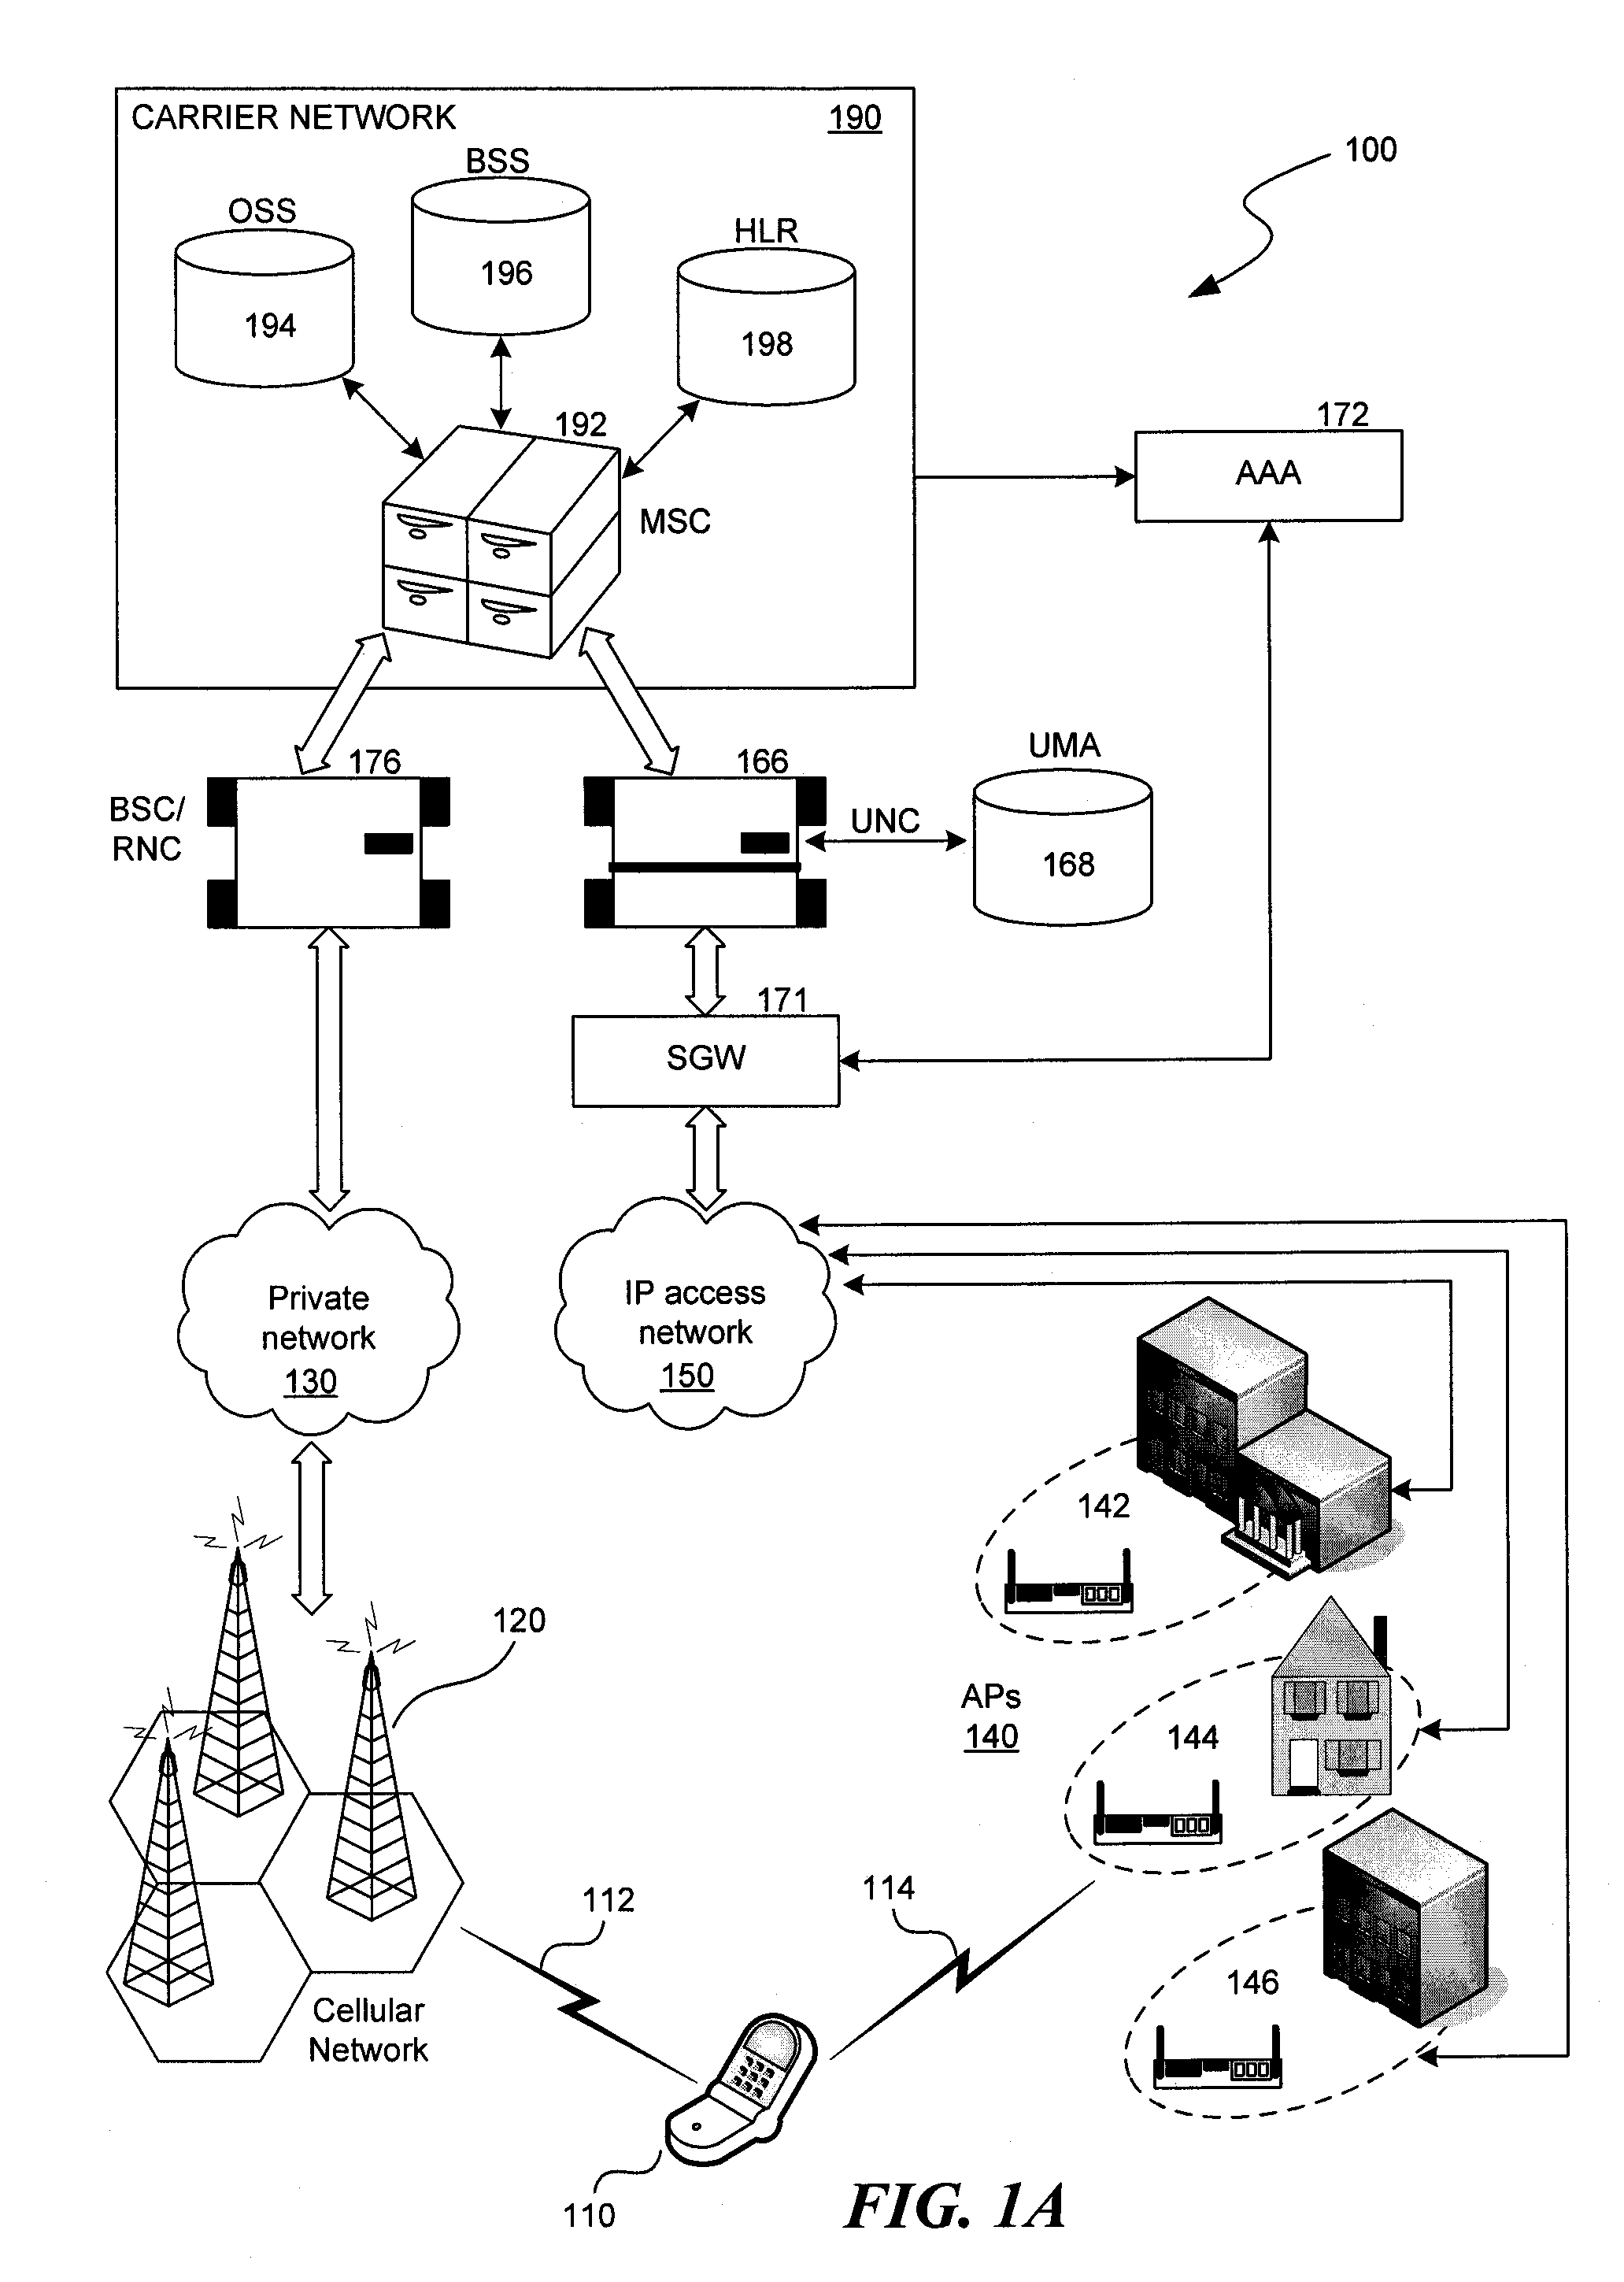 System and method for connecting to a voice network, such as wirelessly connecting to a UMA network